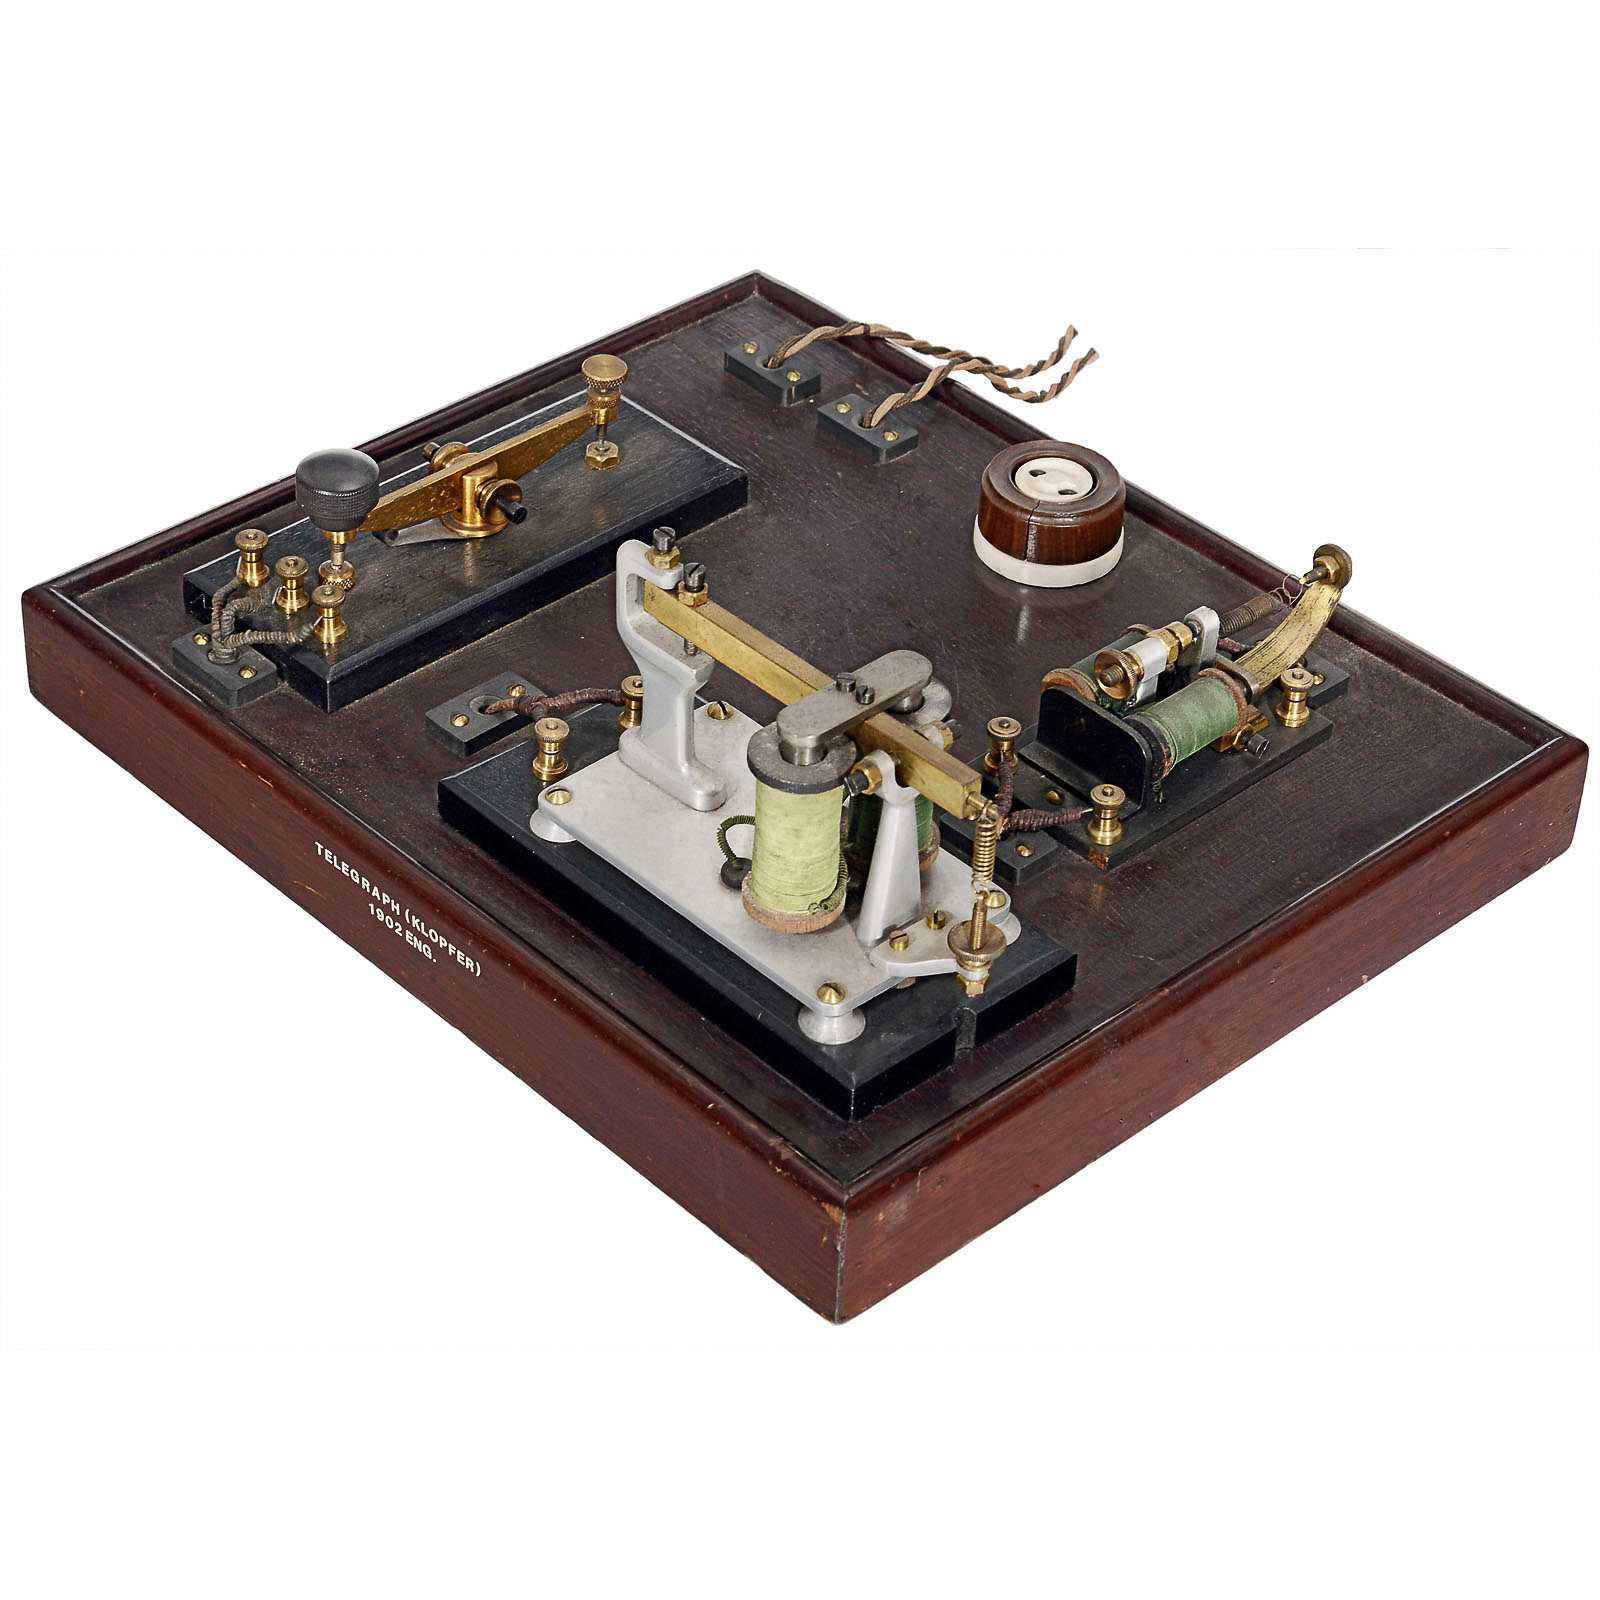 English Telegraph Demonstration Model, 1902  Dated 1902; consisting of key, relay and sounder; on